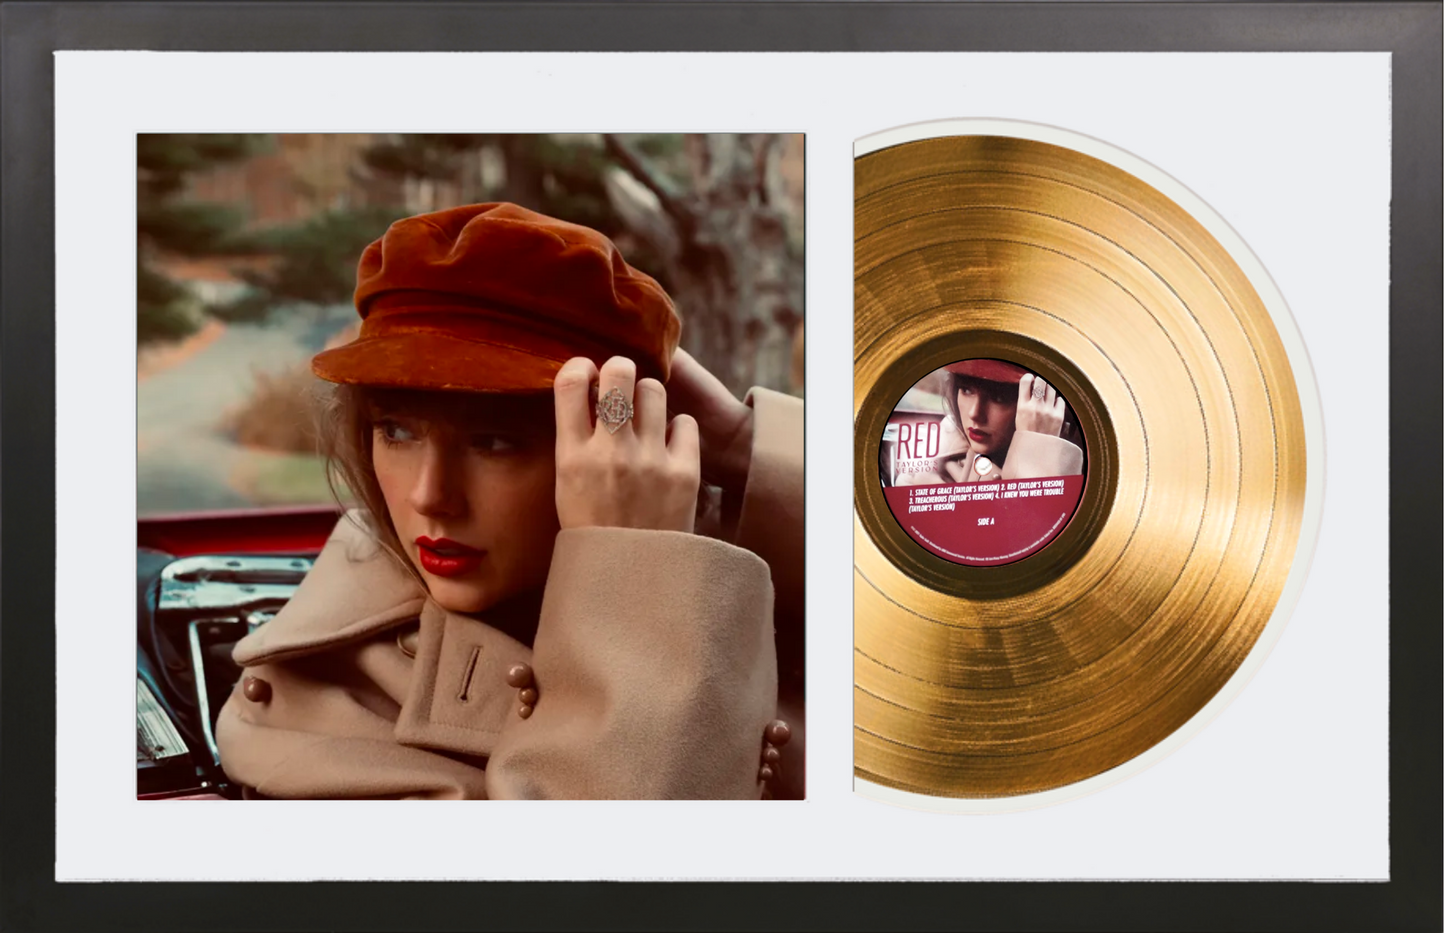 Taylor Swift - Red (Taylor's Version) - 14K Gold Plated, Limited Edition Album